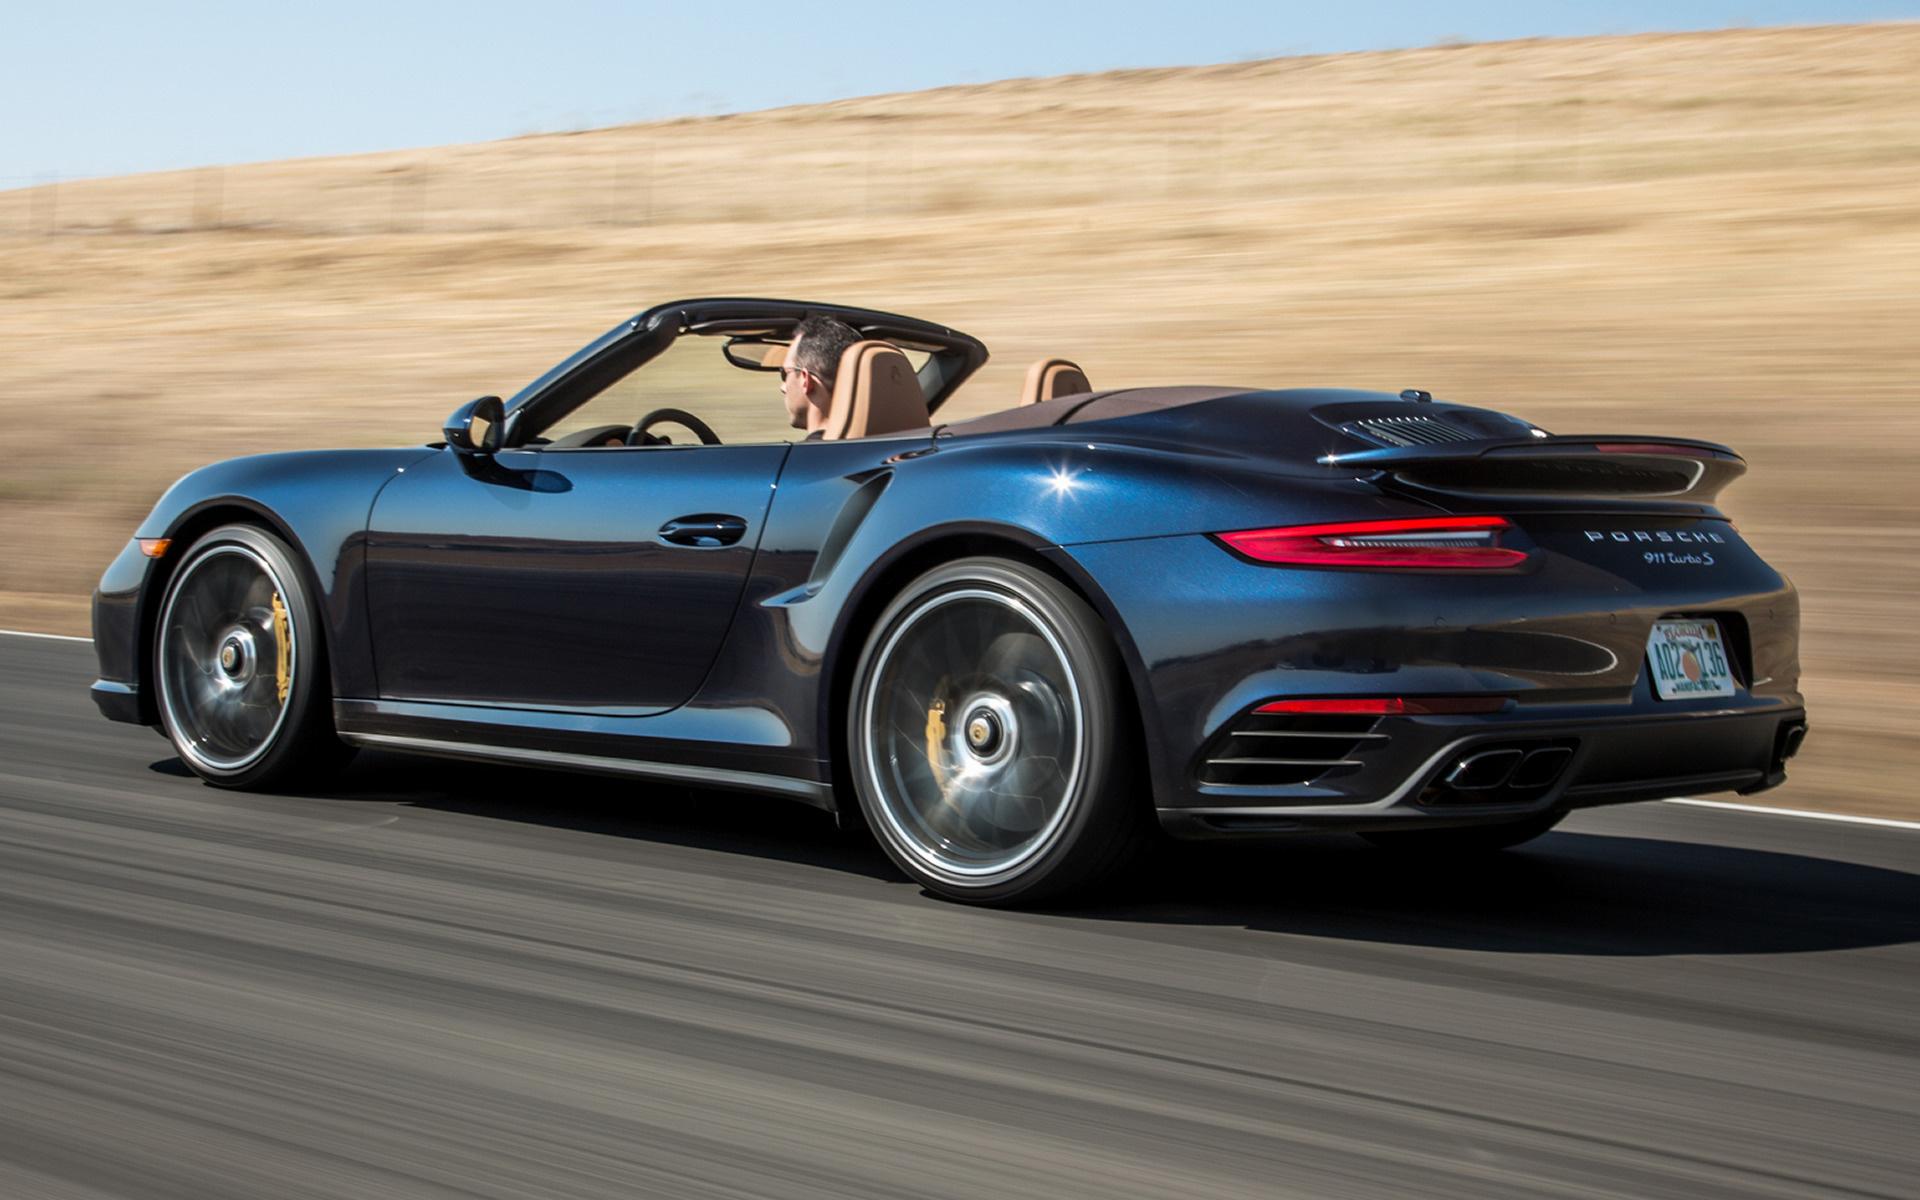 Porsche 911 Turbo S Cabriolet (US) and HD Image